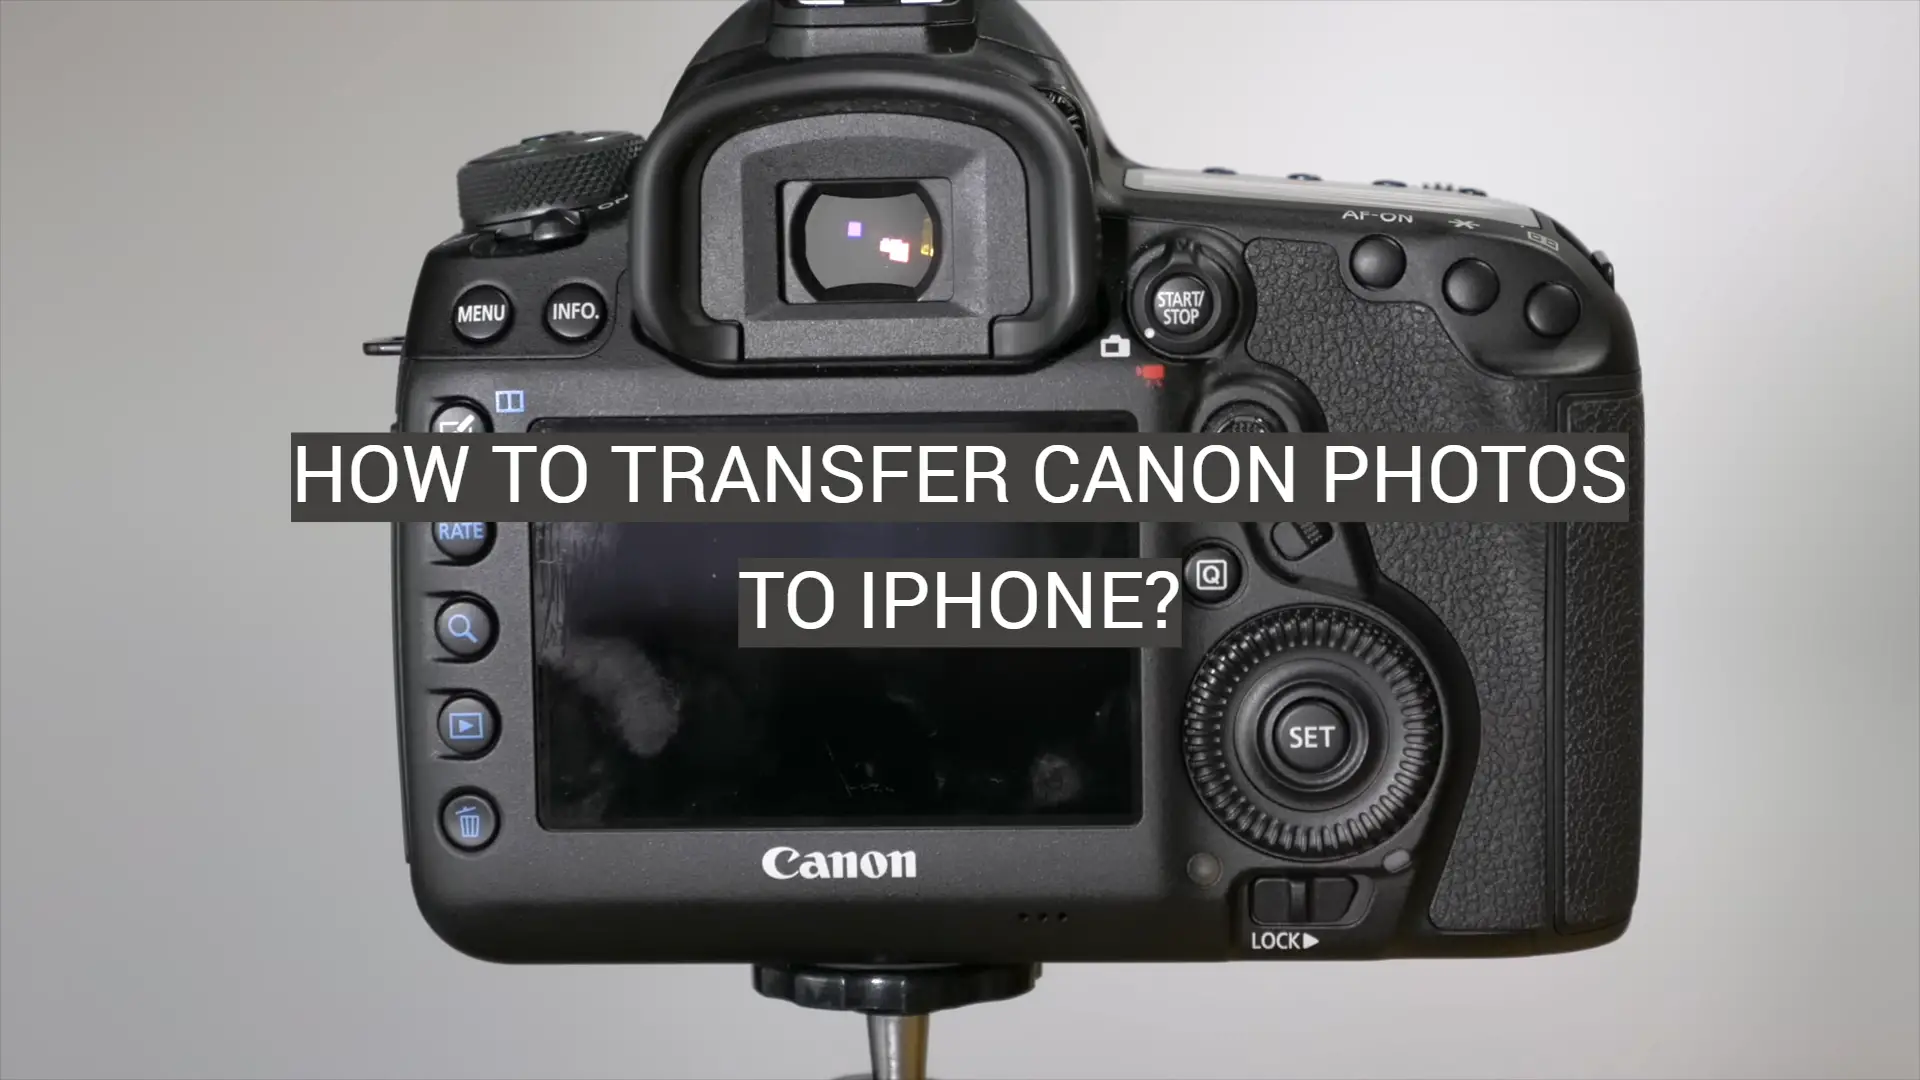 How to Transfer Canon Photos to iPhone?